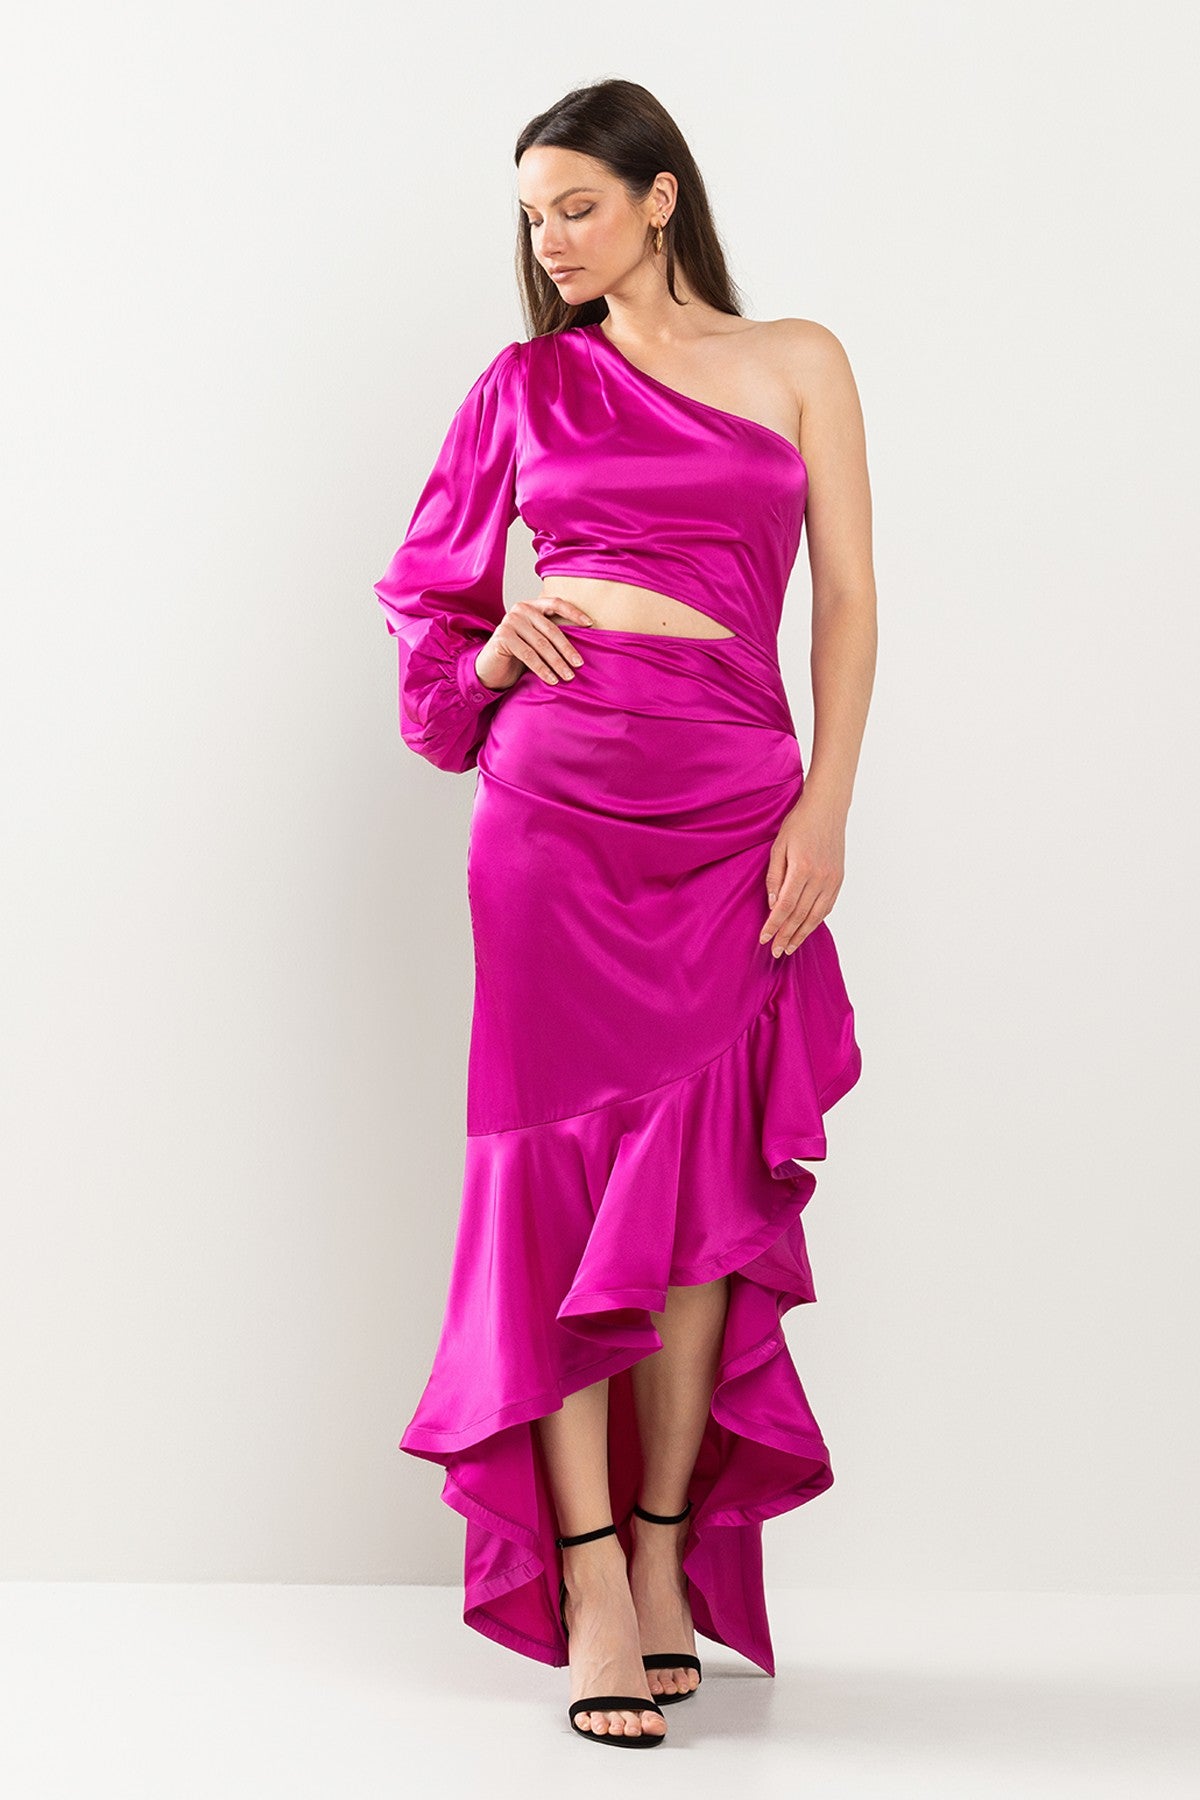 Cocktail Dresses High Low One shoulder Ruffle Dress Hot Pink